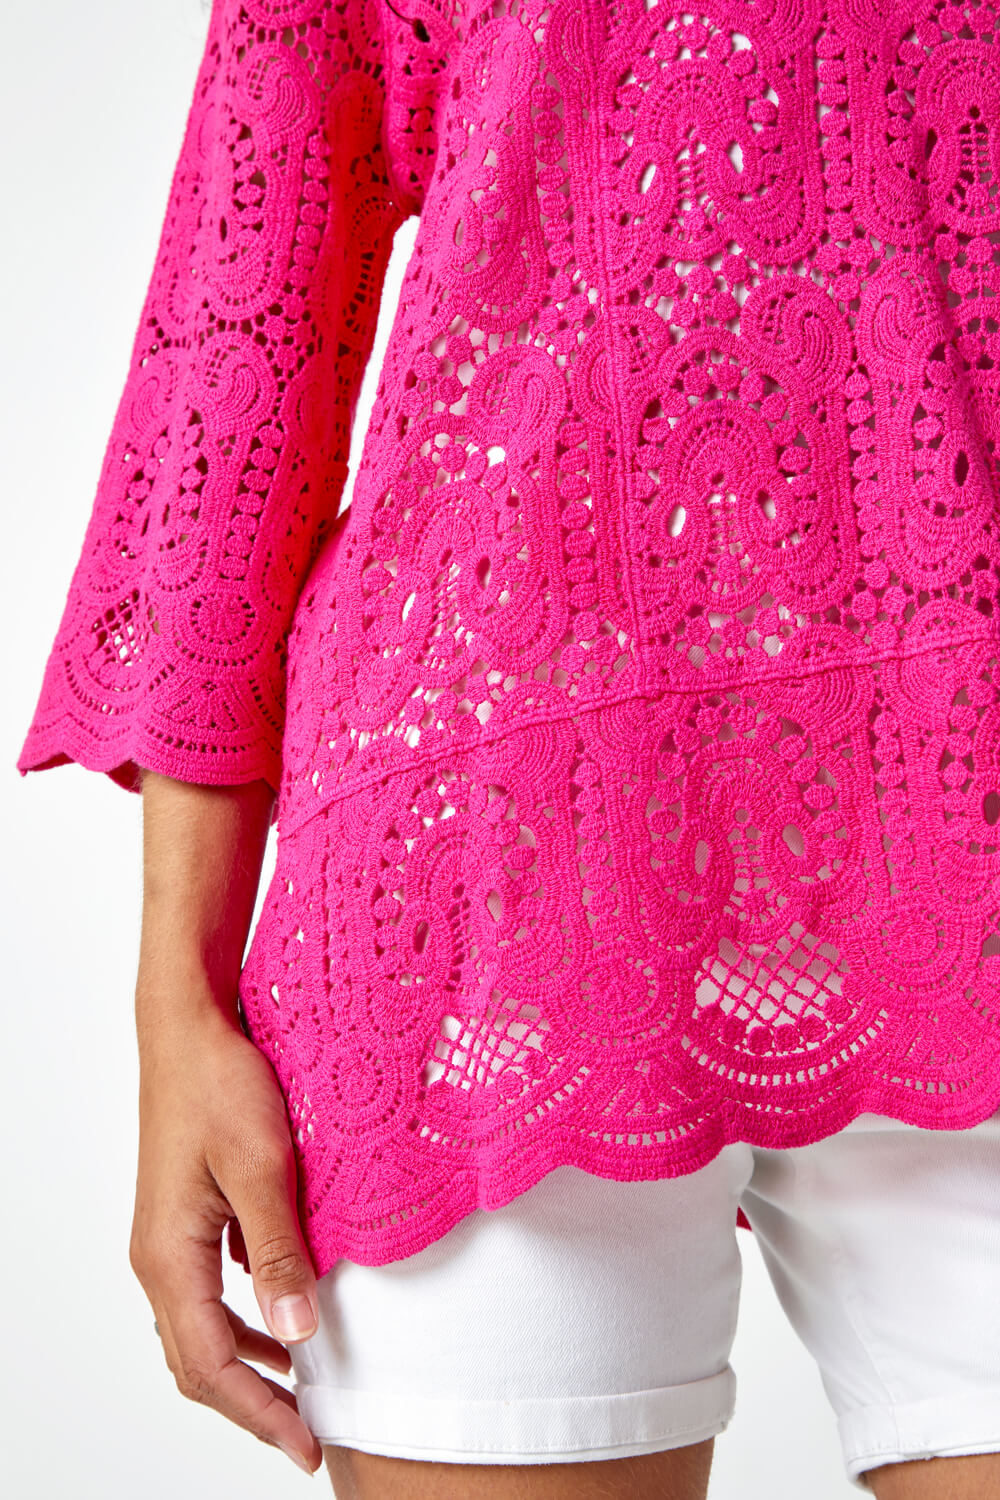 PINK Cotton Crochet Tunic Top, Image 5 of 5